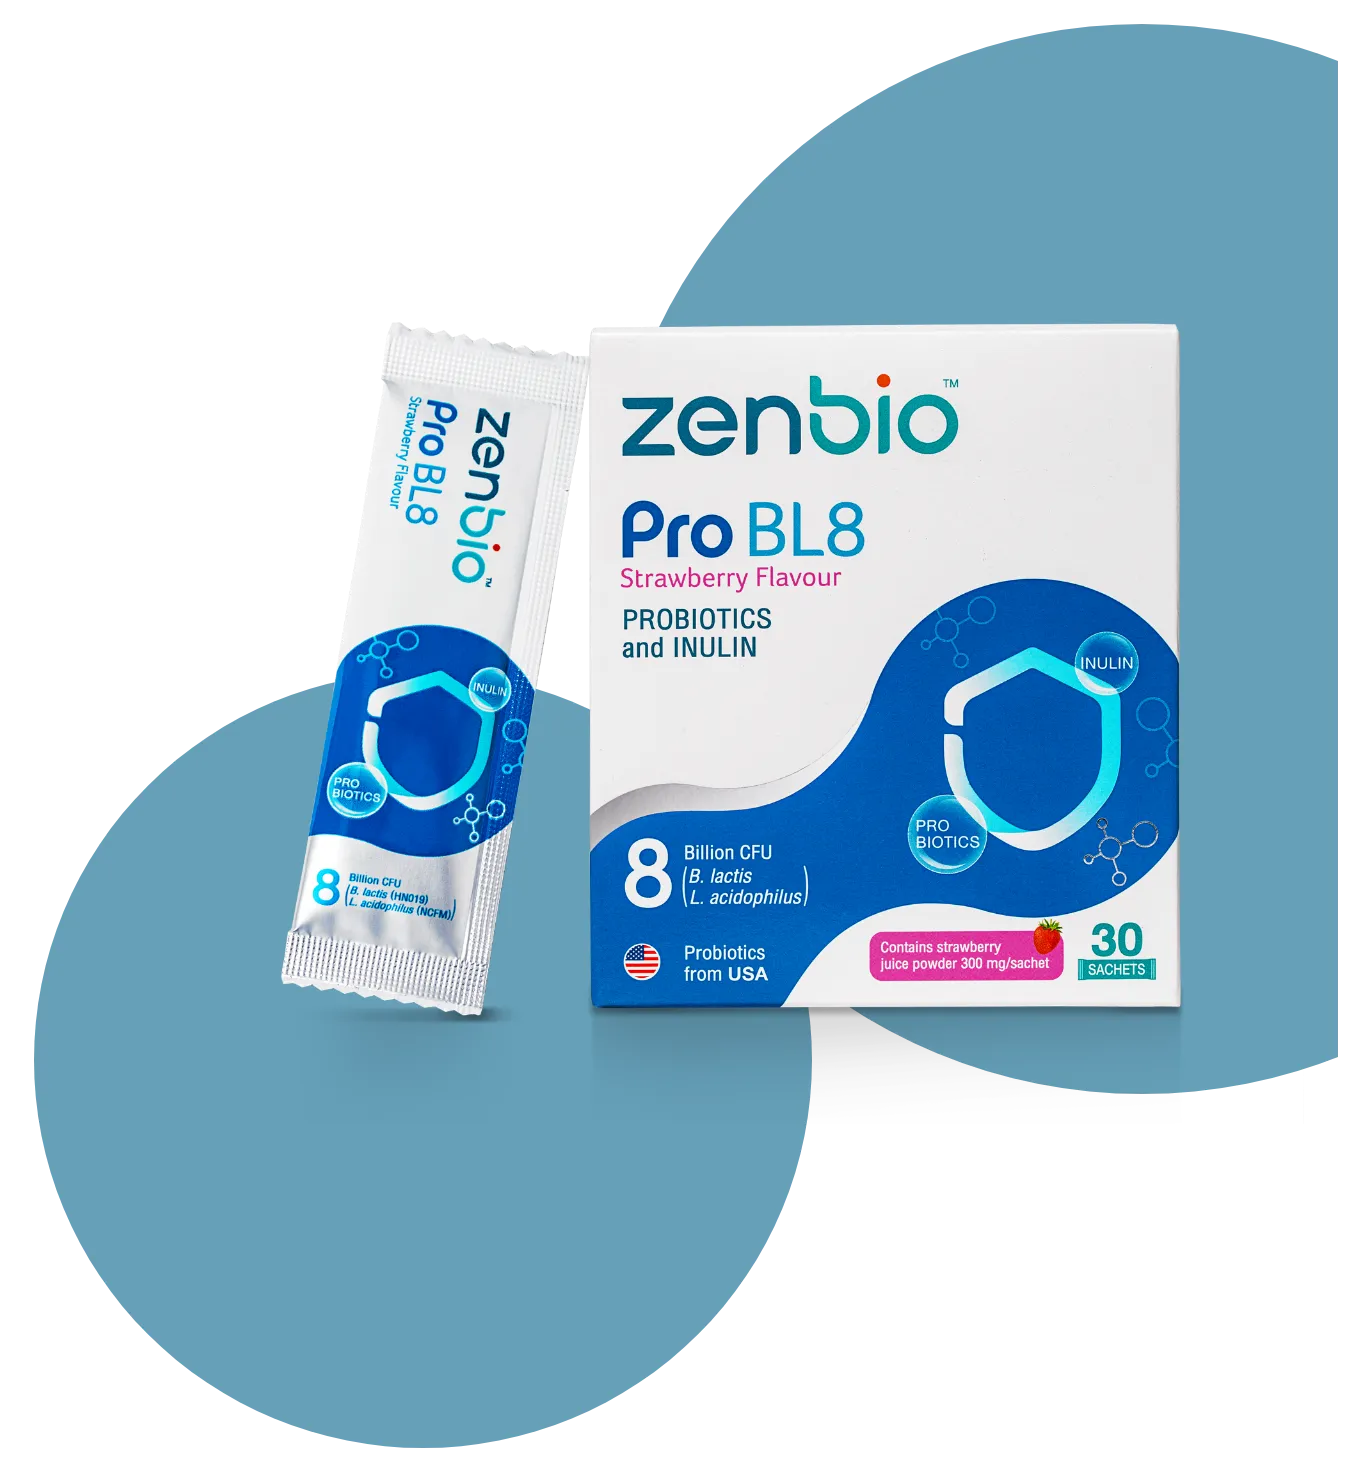 A box and sachet package of Zenbio Pro BL8, a probiotics and inulin supplement.